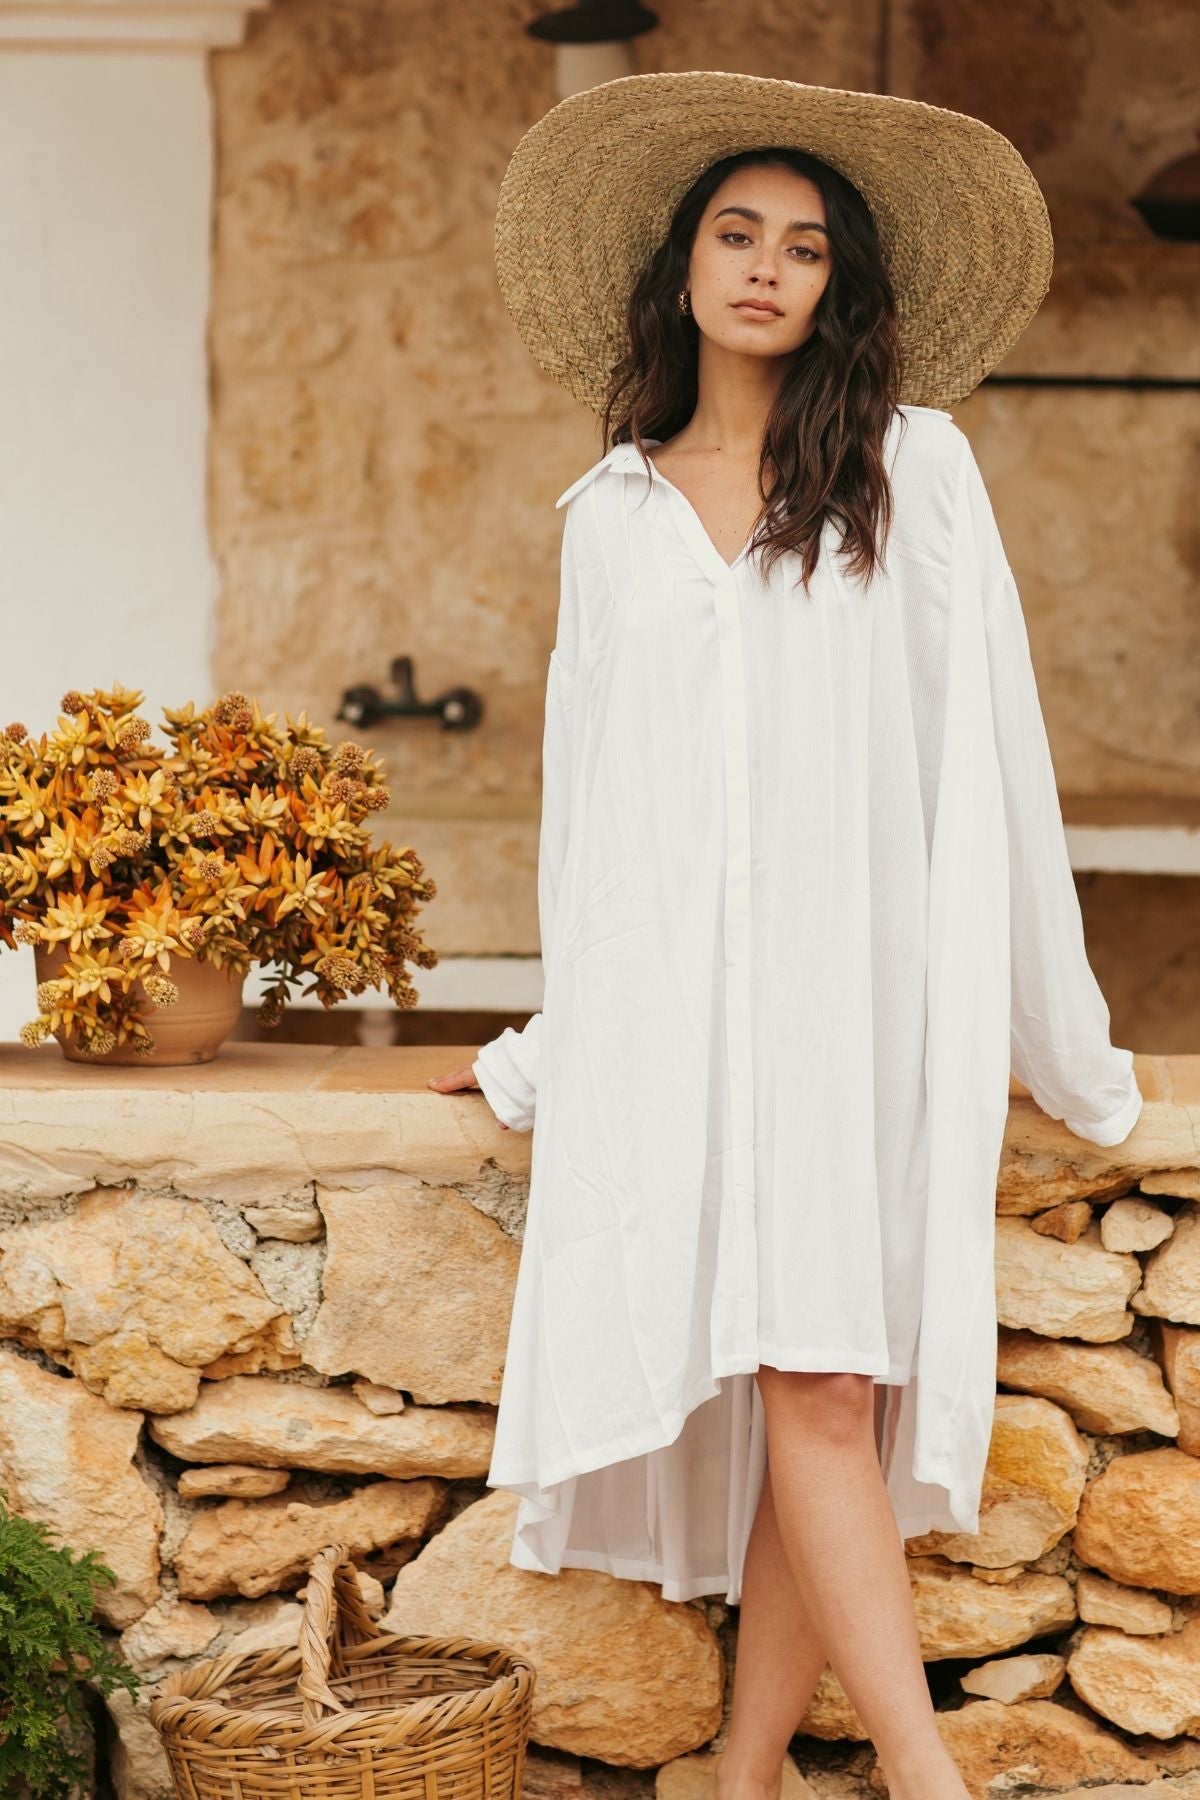 Kundalini Gown Short (100% Bamboo Rayon, Off-White)